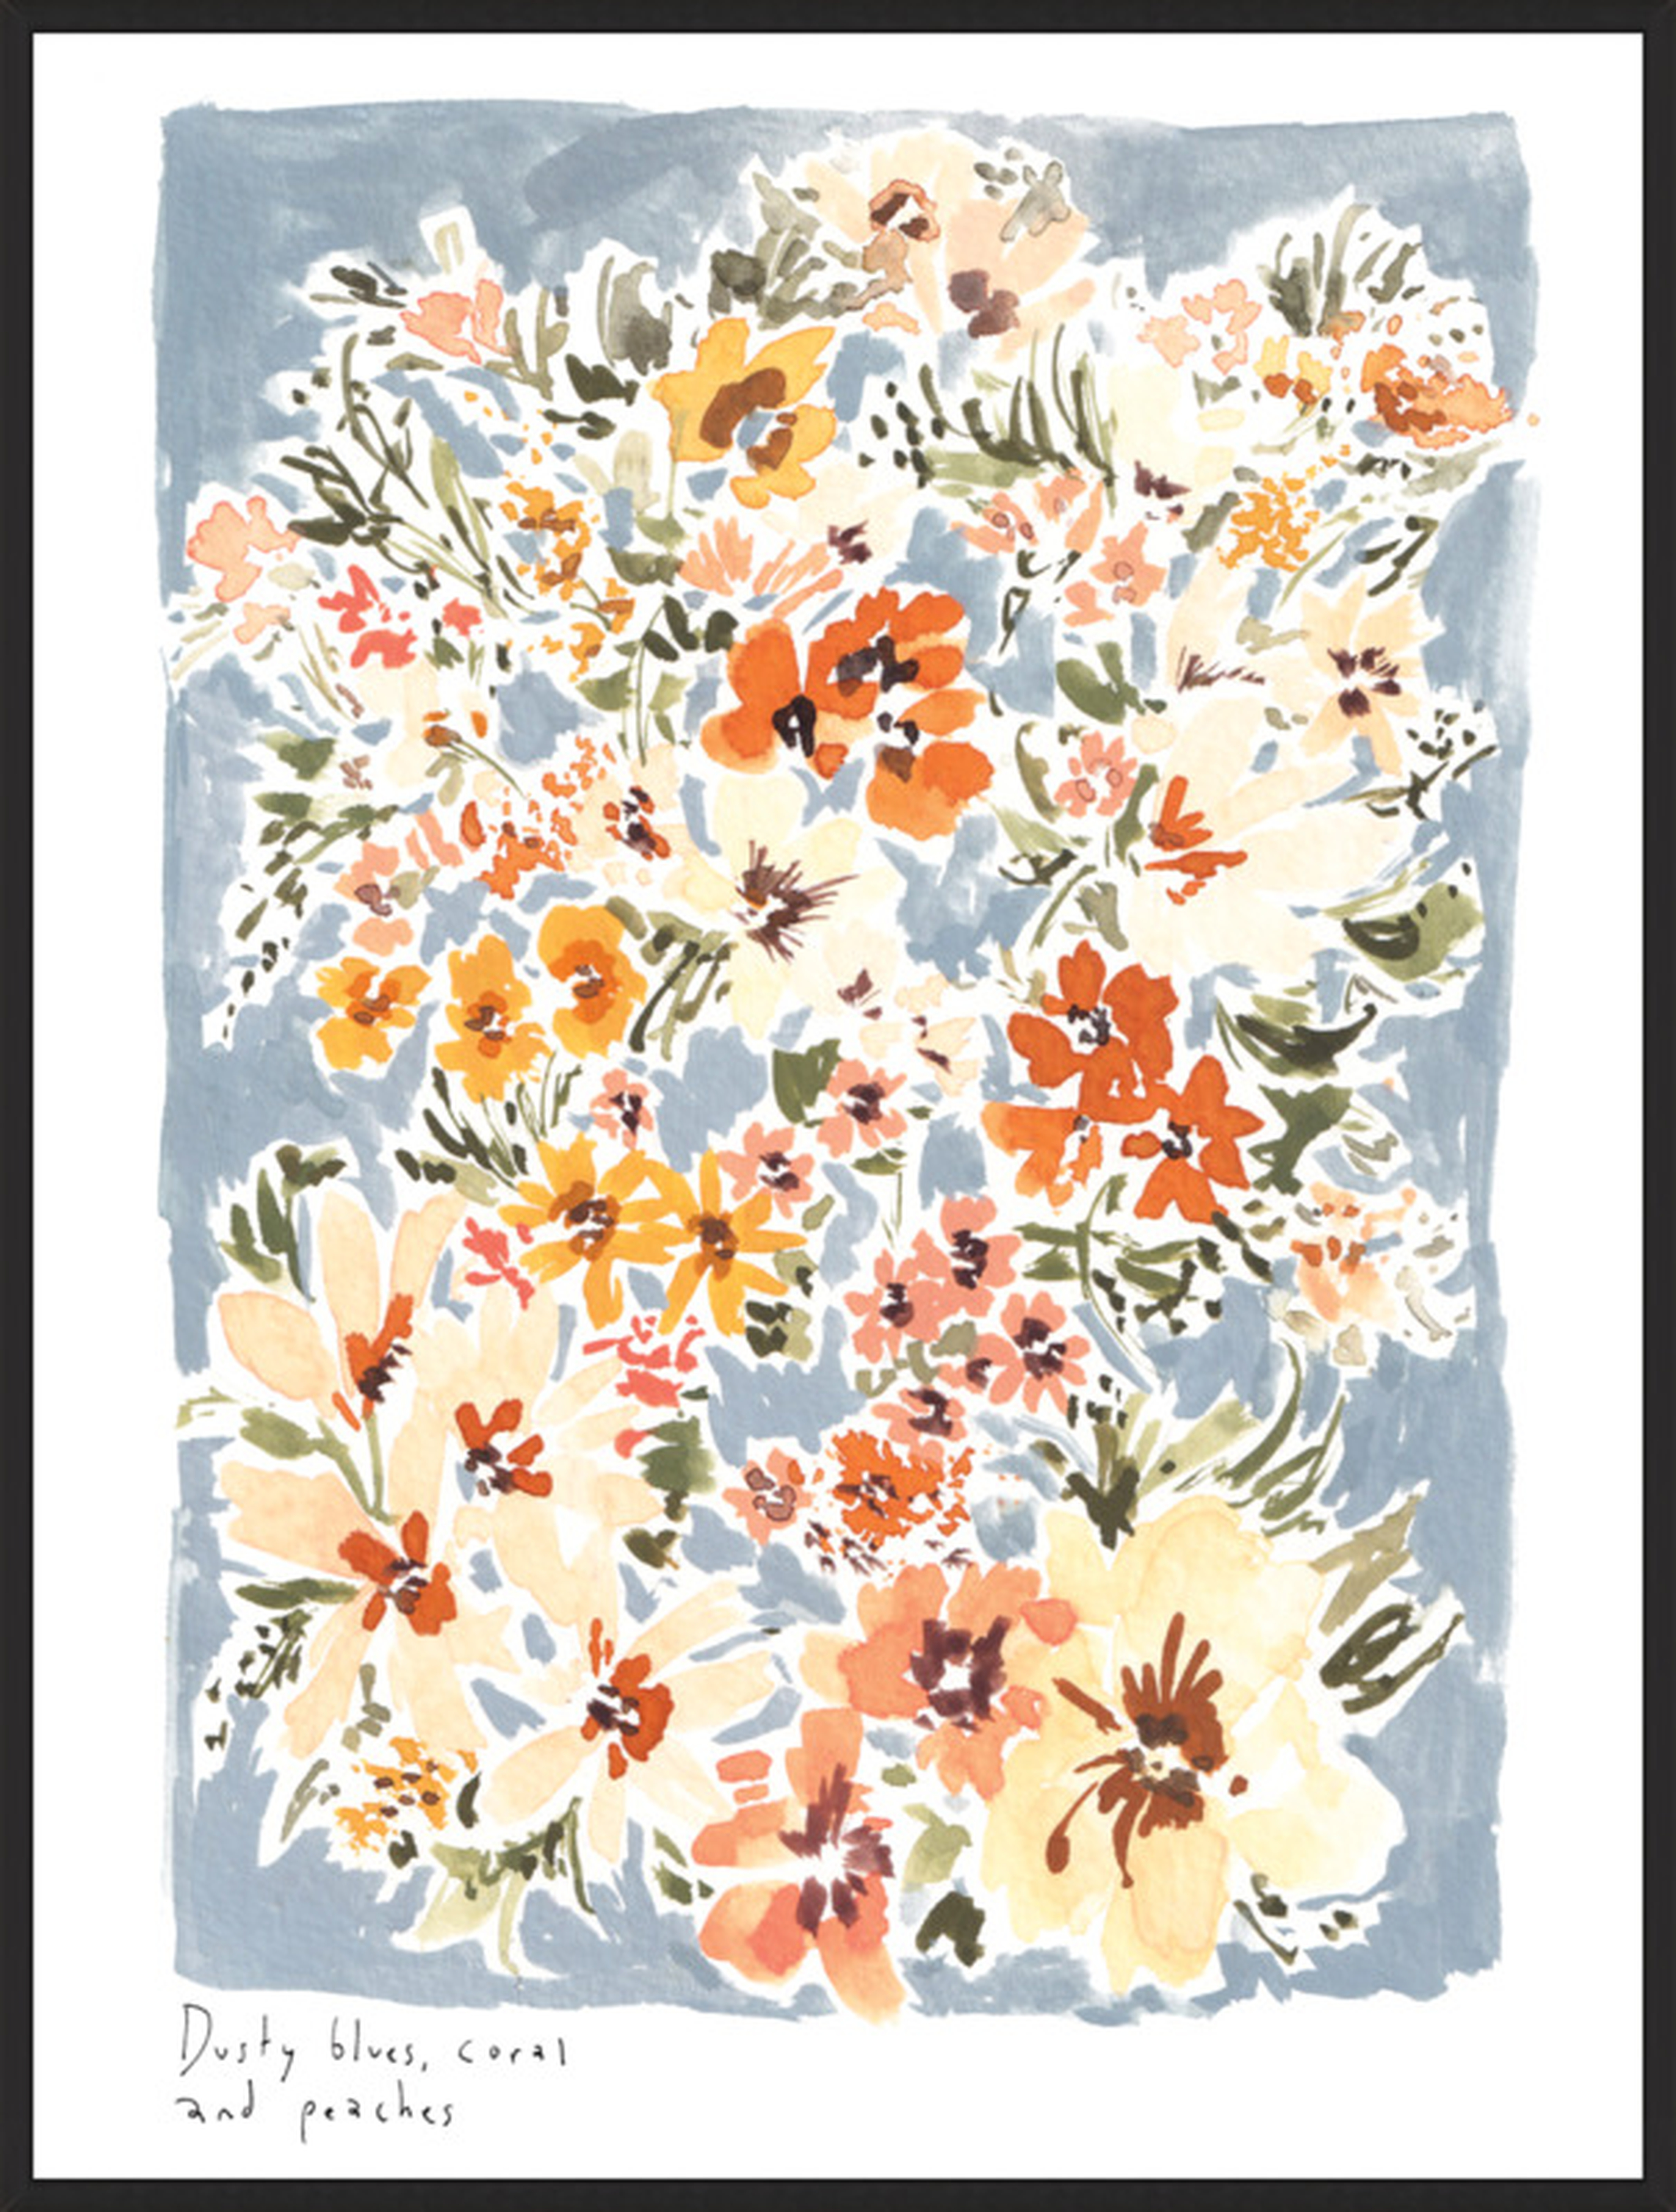 Dusty blues, Coral and Peaches by Rose Jocham - Artfully Walls